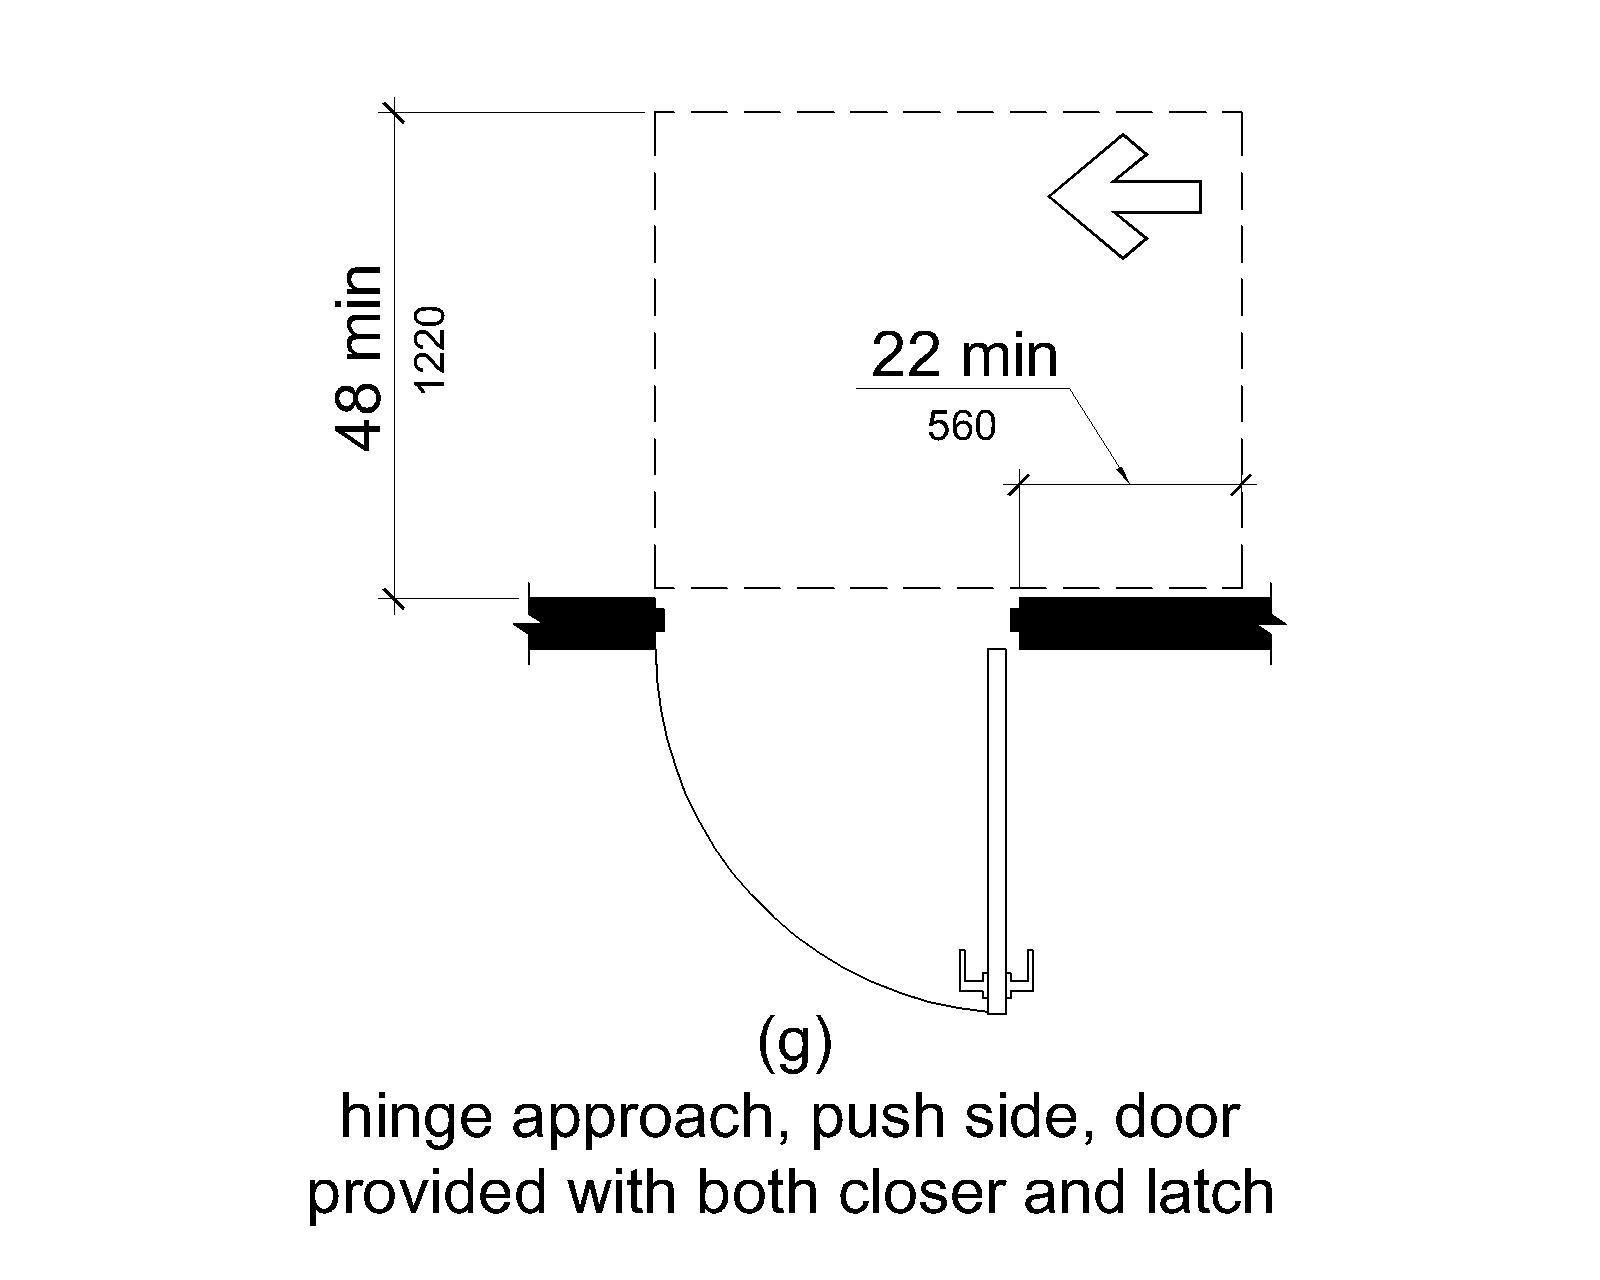 (g) On the push side, maneuvering space extends 22 inches (560 mm) from the hinge side of the doorway and 48 inches (1220 mm) minimum perpendicular to the doorway at doors with both a closer and a latch.